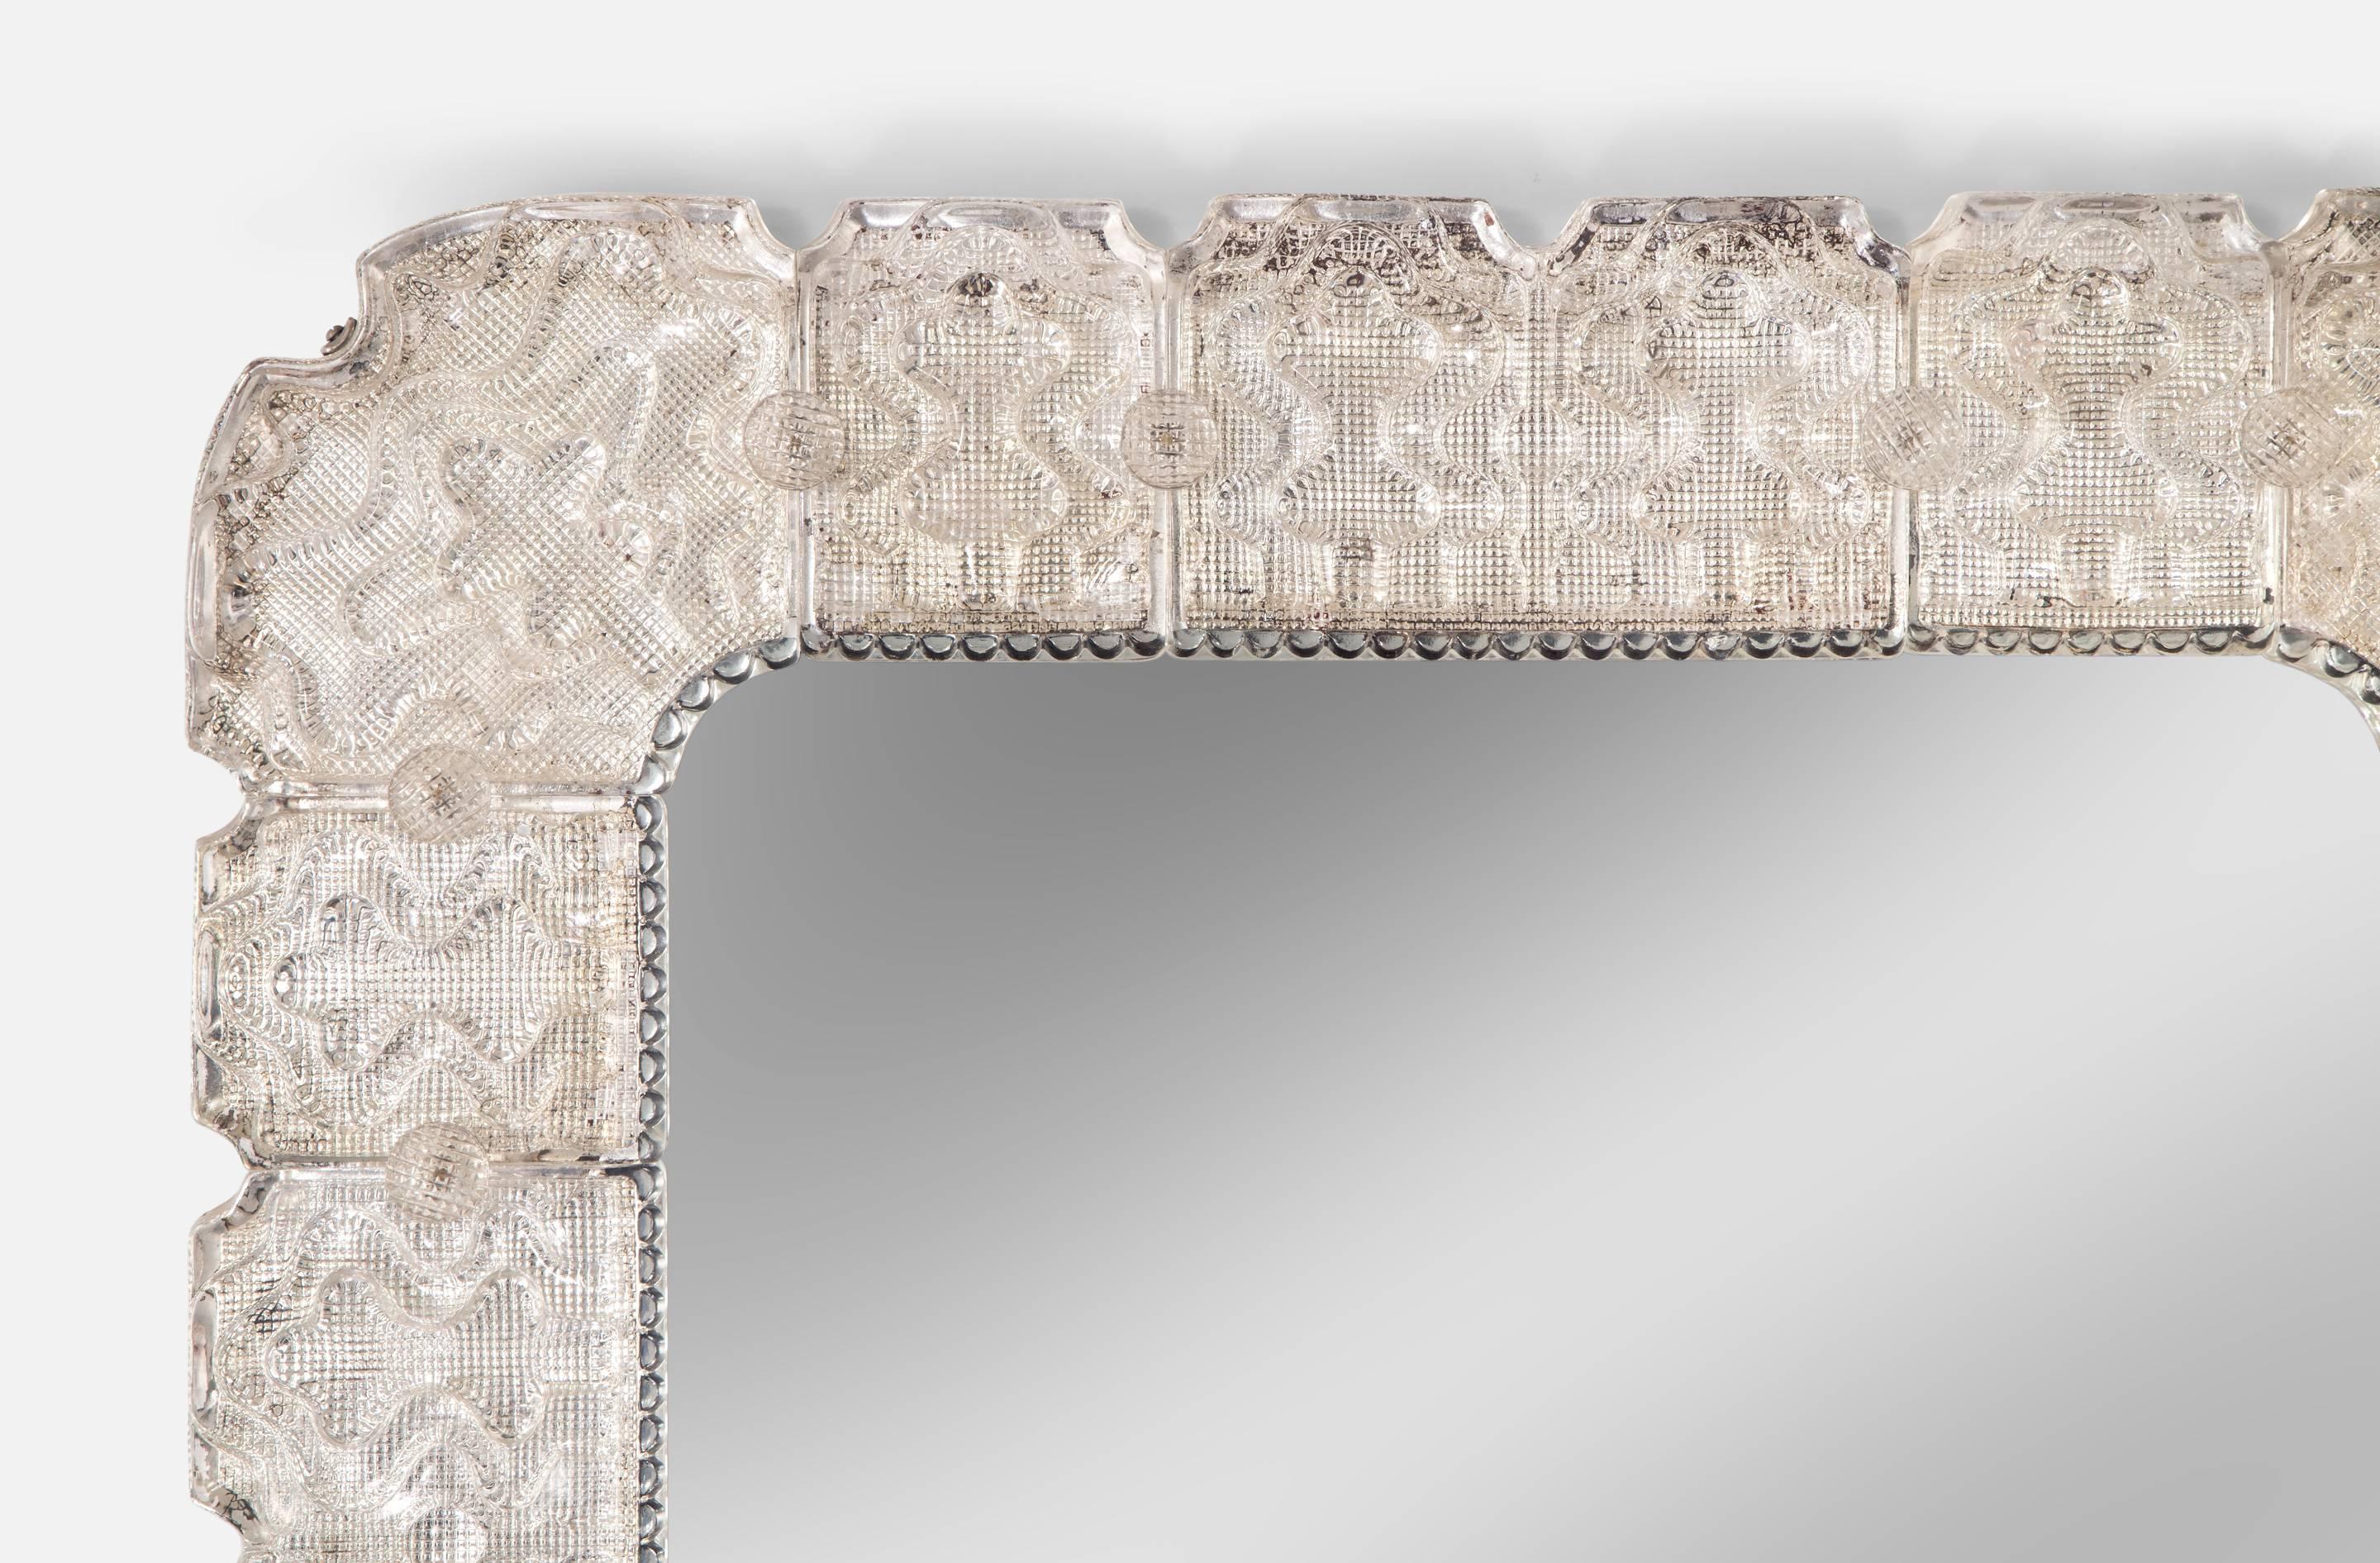 The rectangular mirror plate with rounded corners and within a glass pearl border, the frame of segmented ice glass attached by glass buttons.